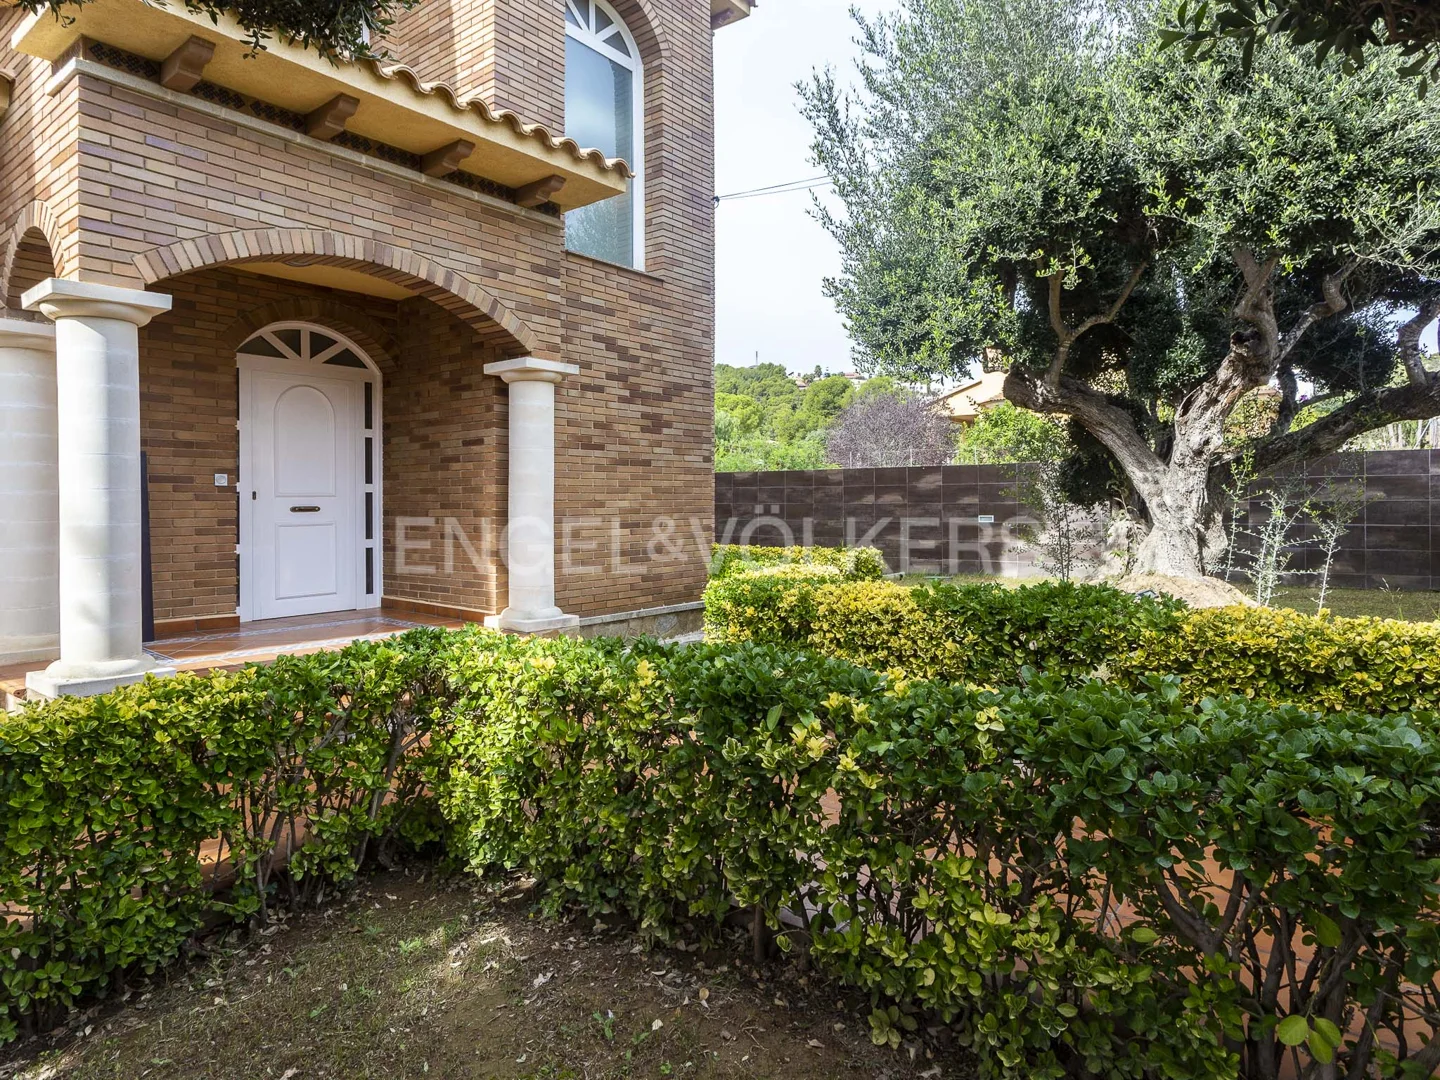 Elegant property in a residential area of the Costa Dorada.